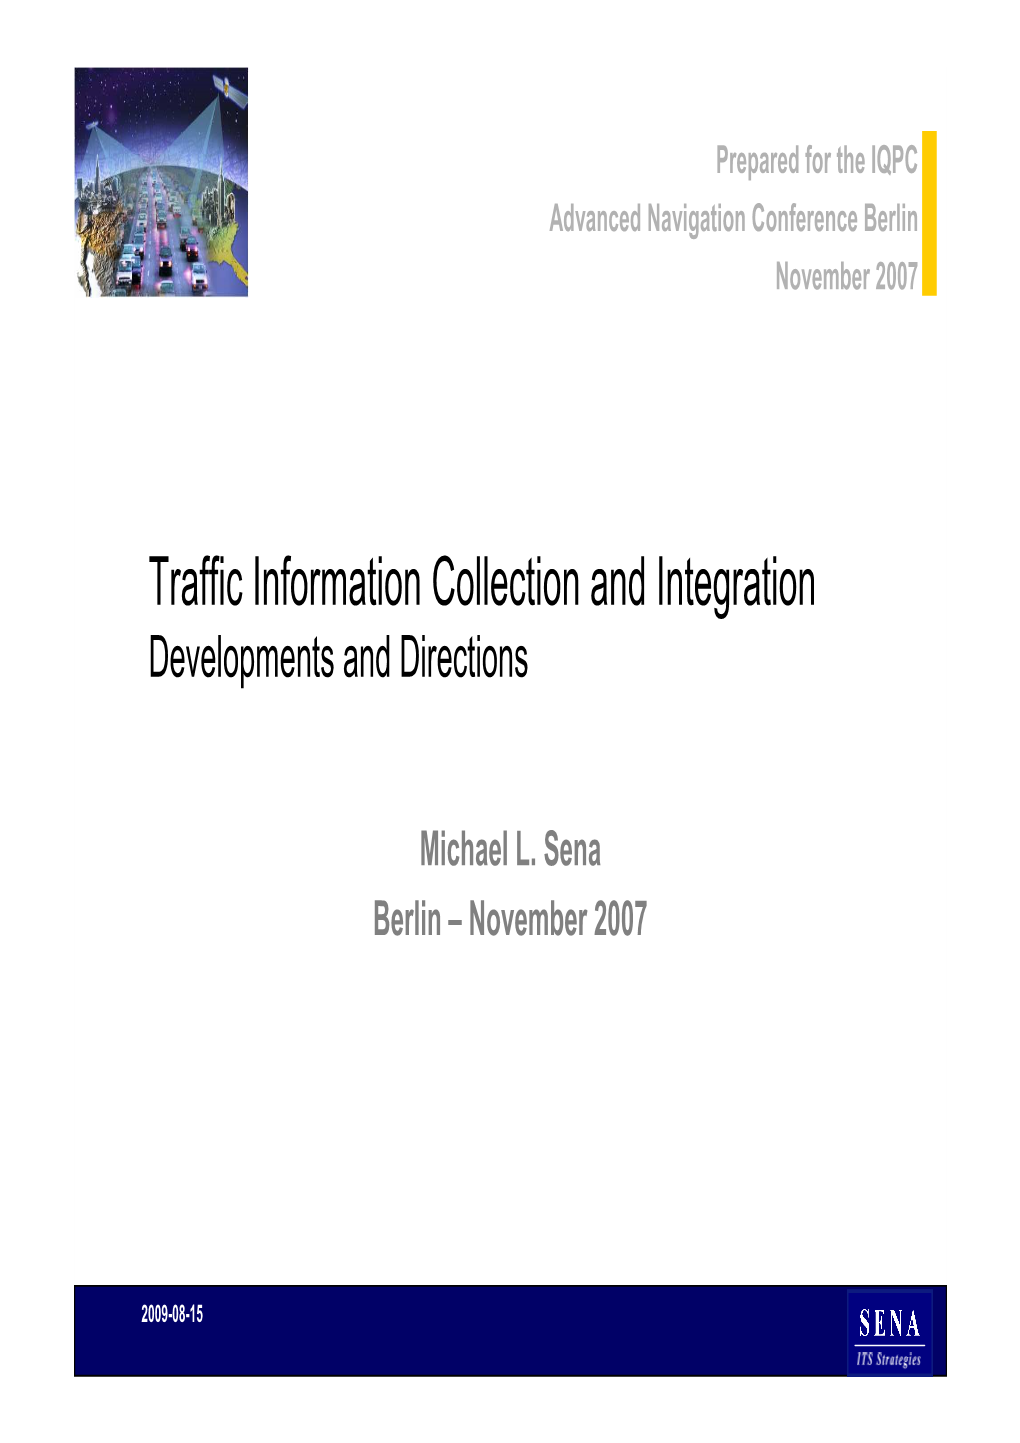 Traffic Information Collection and Integration NO7